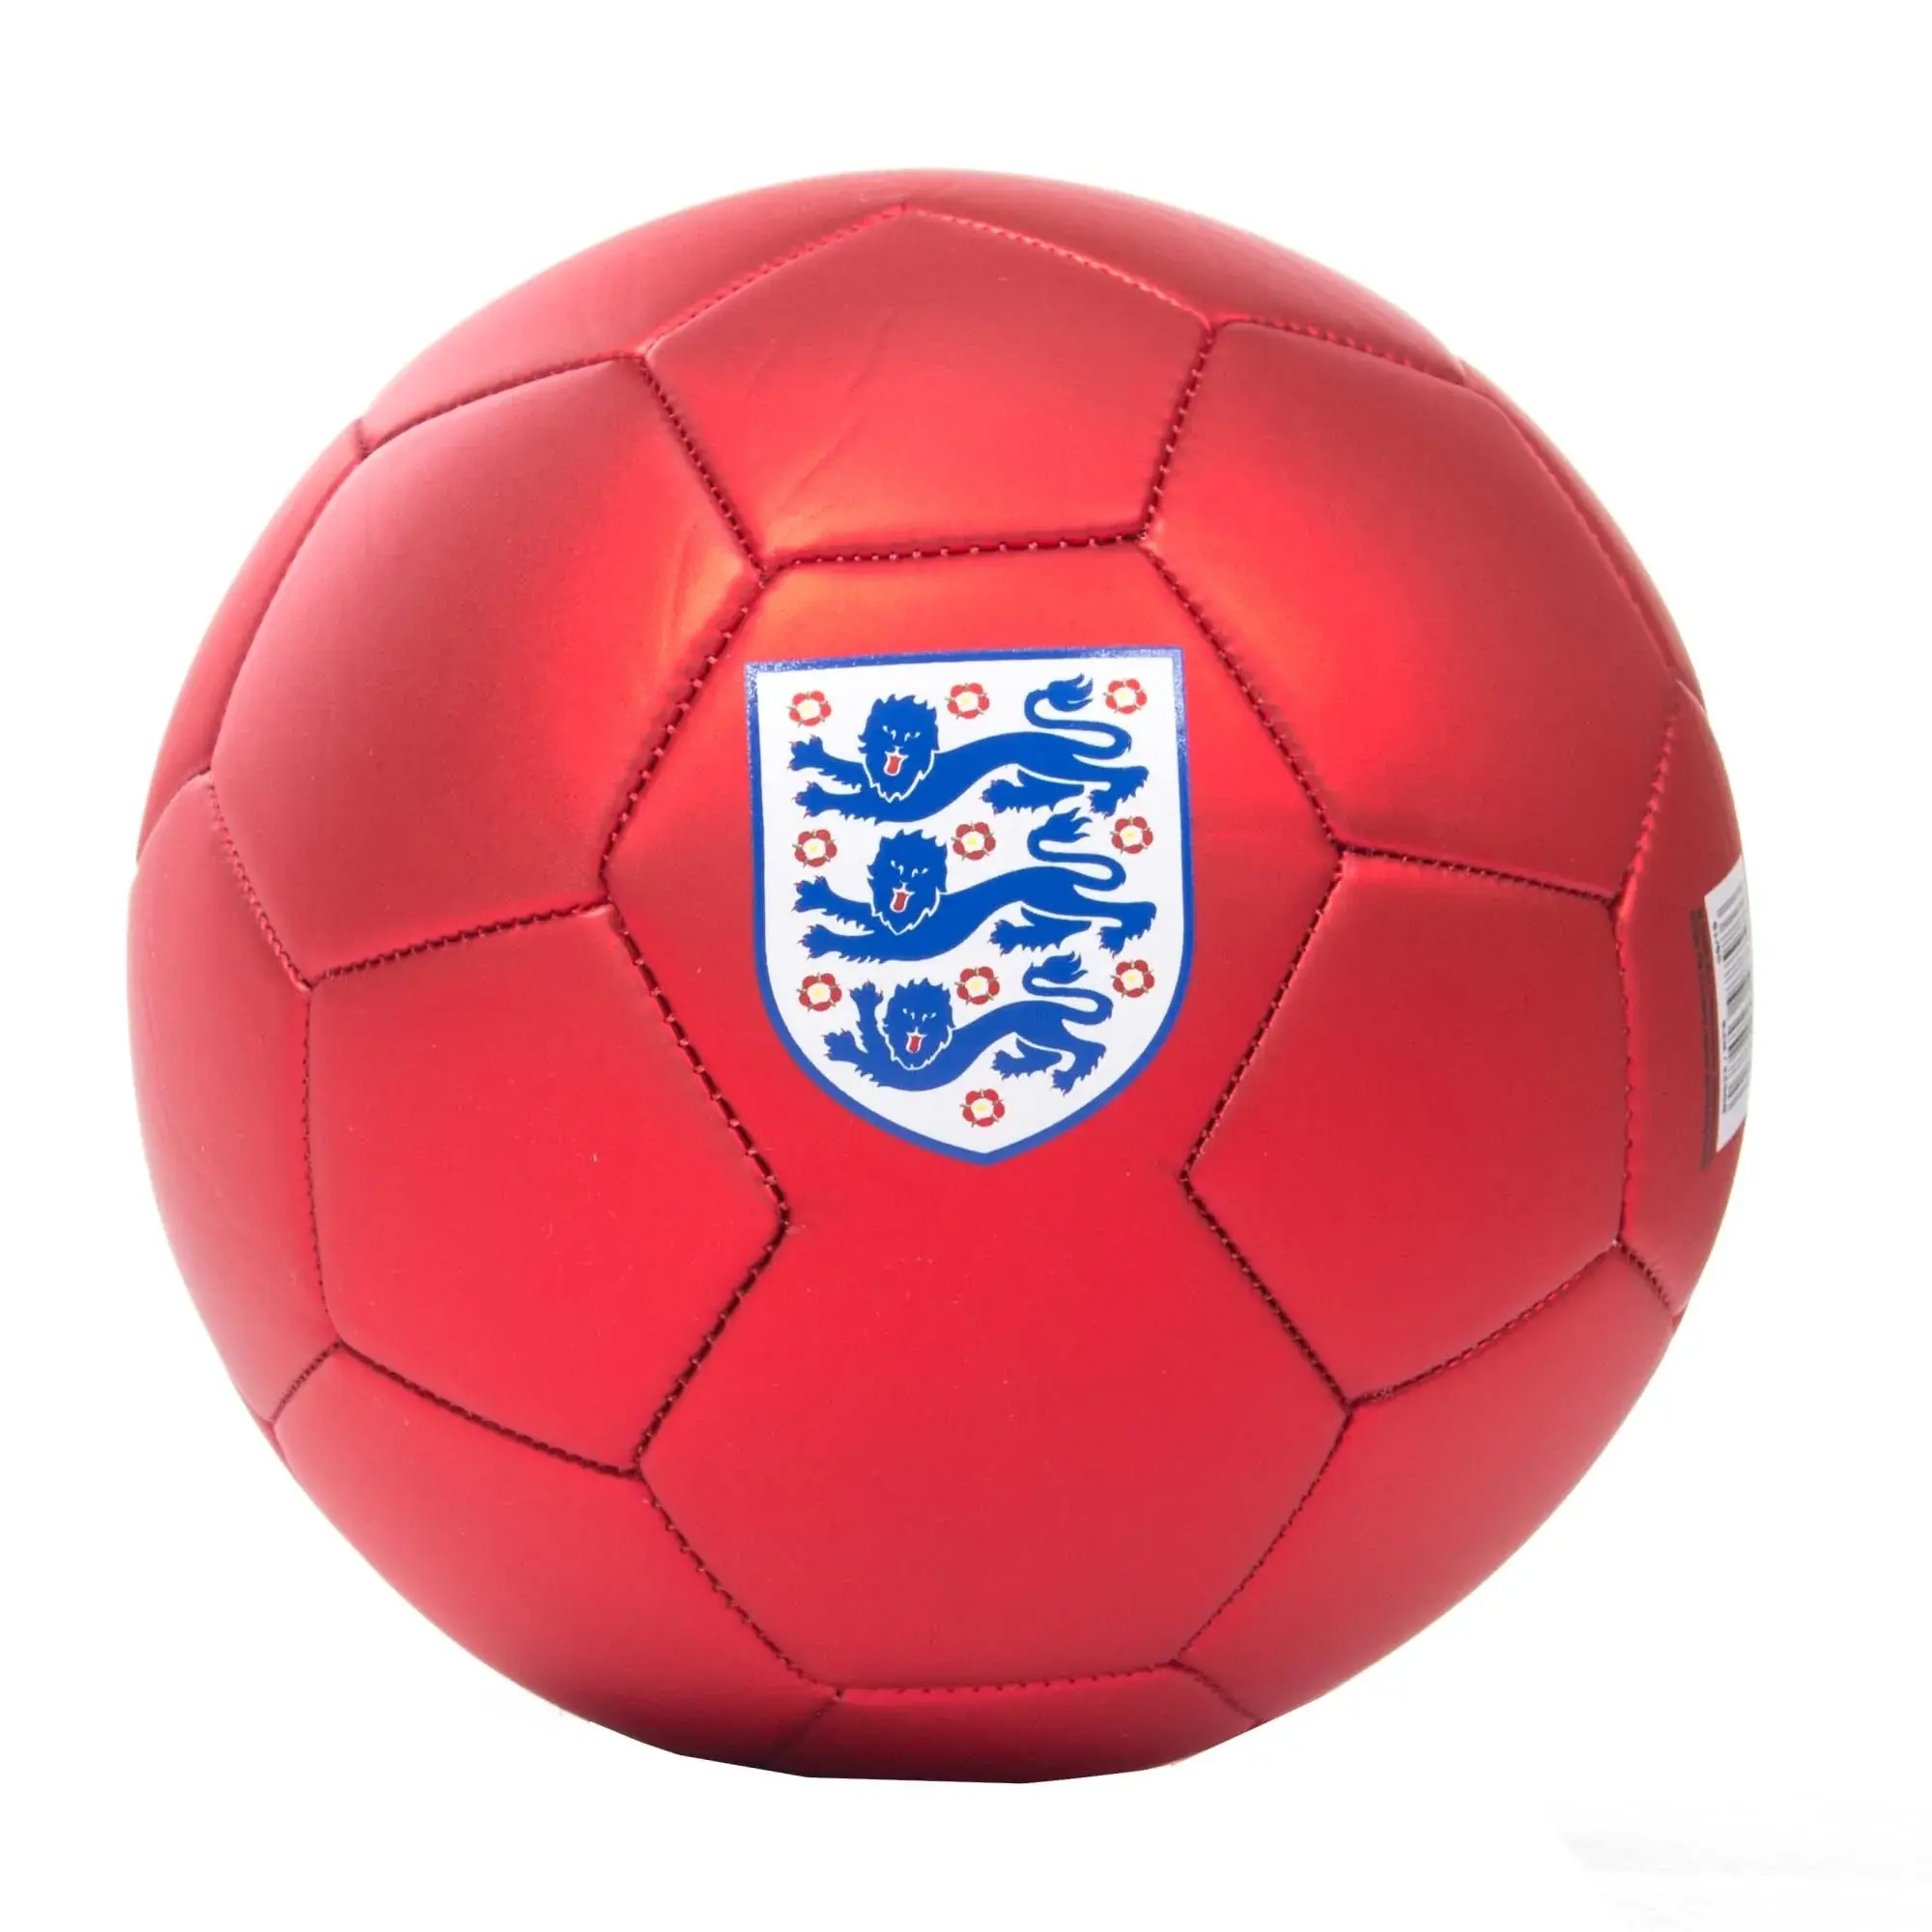 Mitre England Football - Red/White